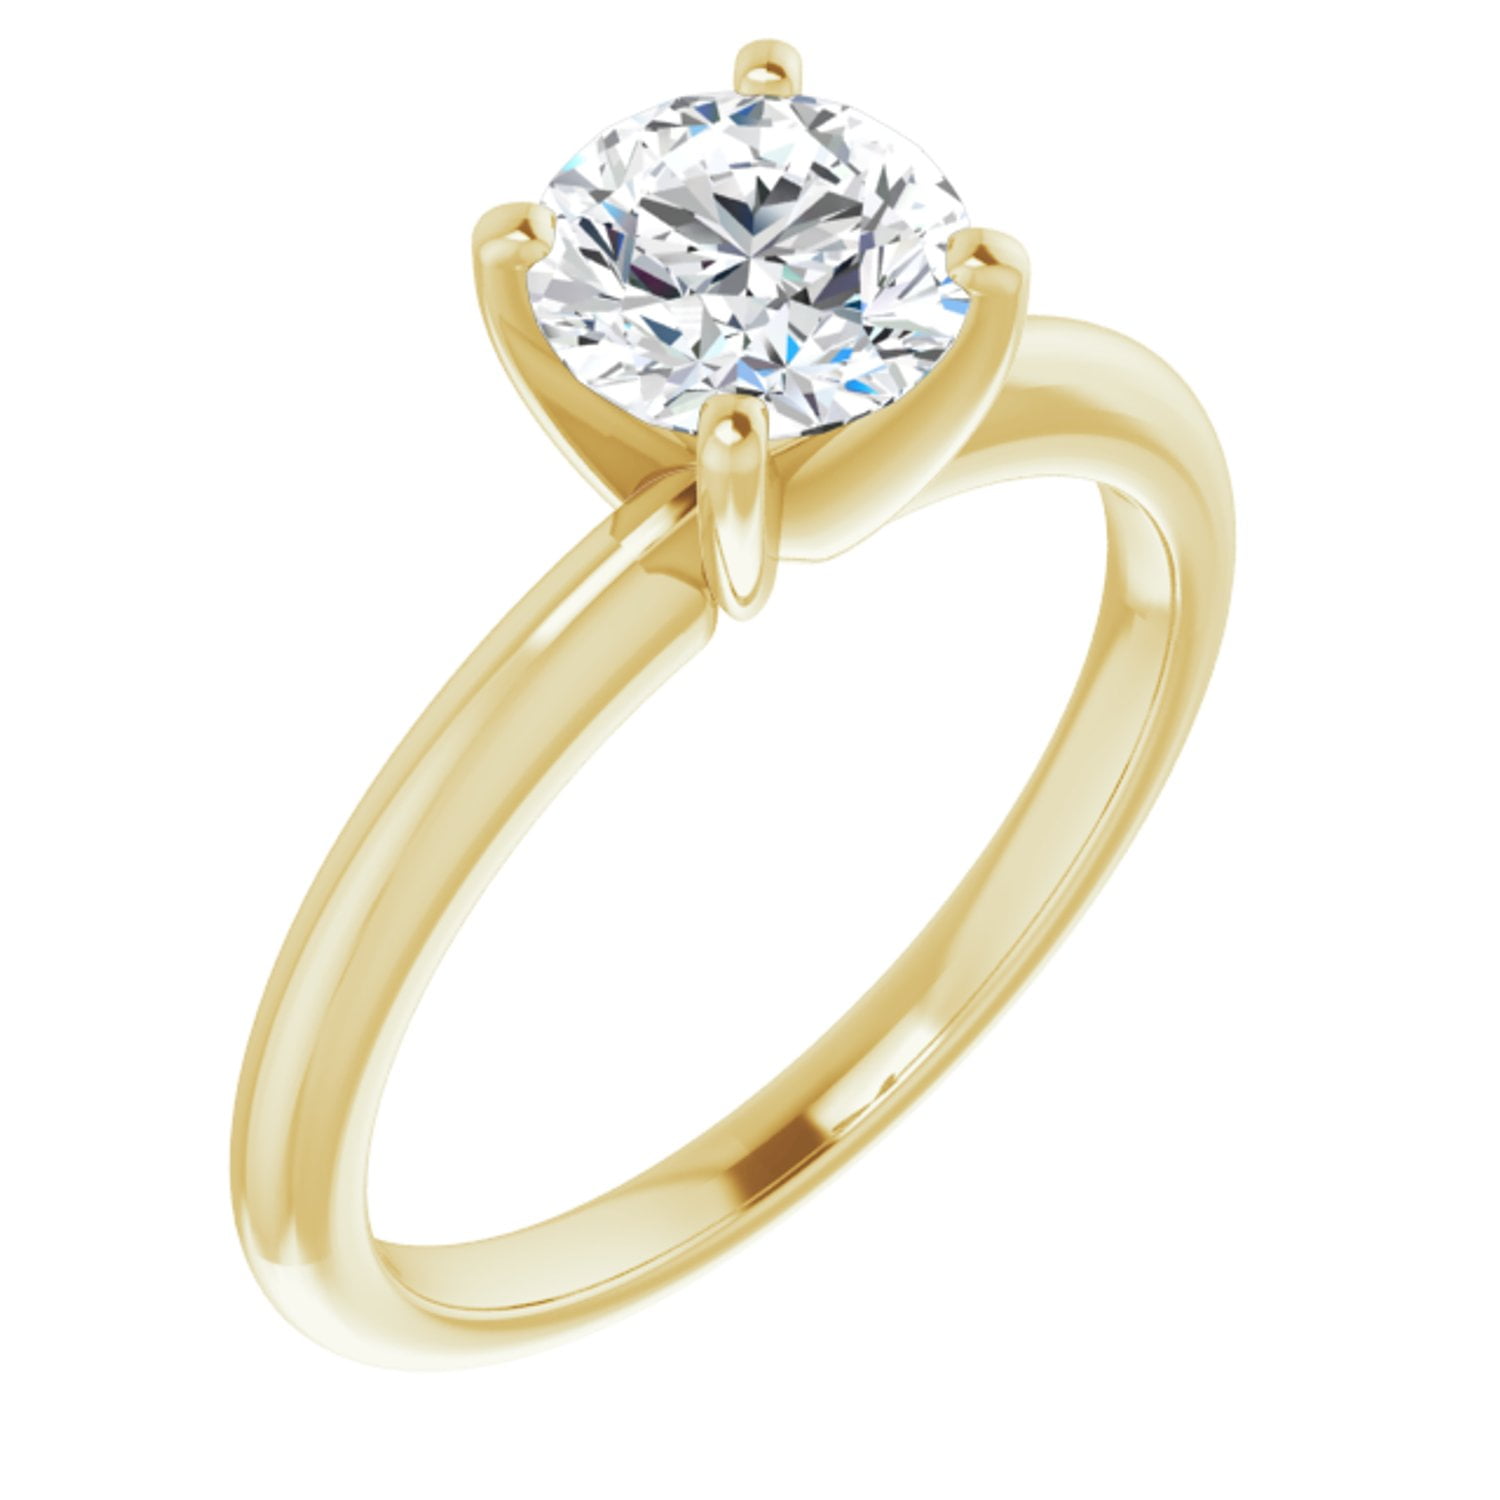 Everyday Elegance Jewelry - 1.0 Carat Round Cut Forever One Created ...